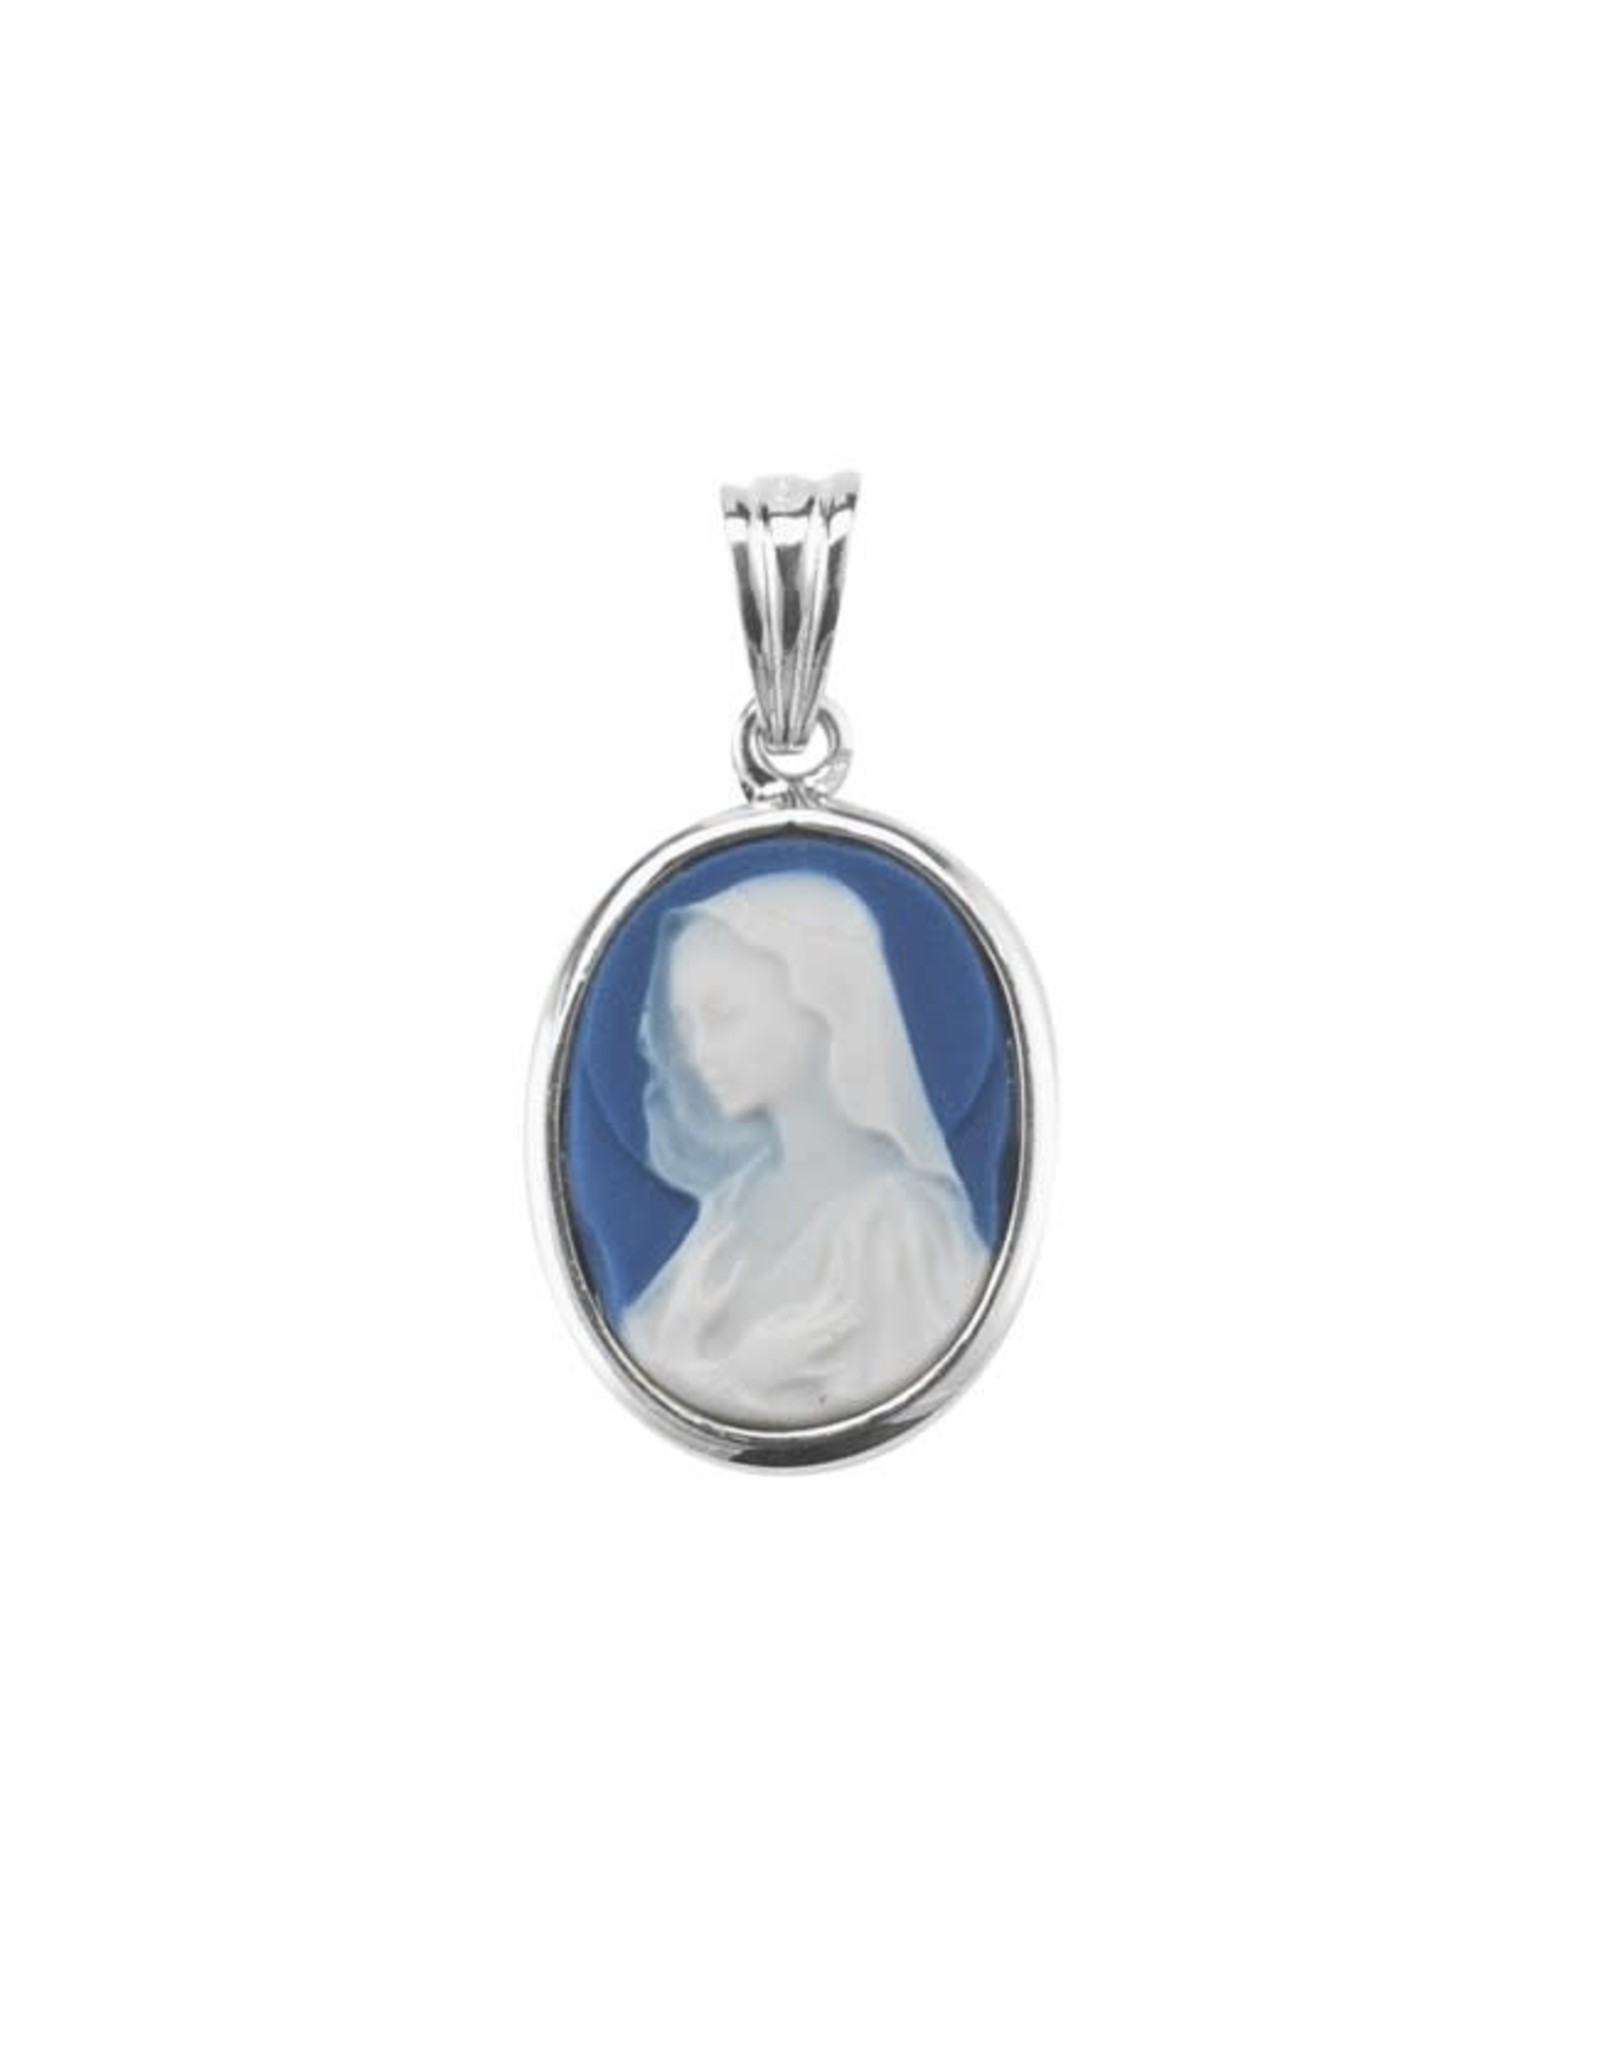 Blue Madonna Cameo Medal, Sterling Silver, 18" Chain